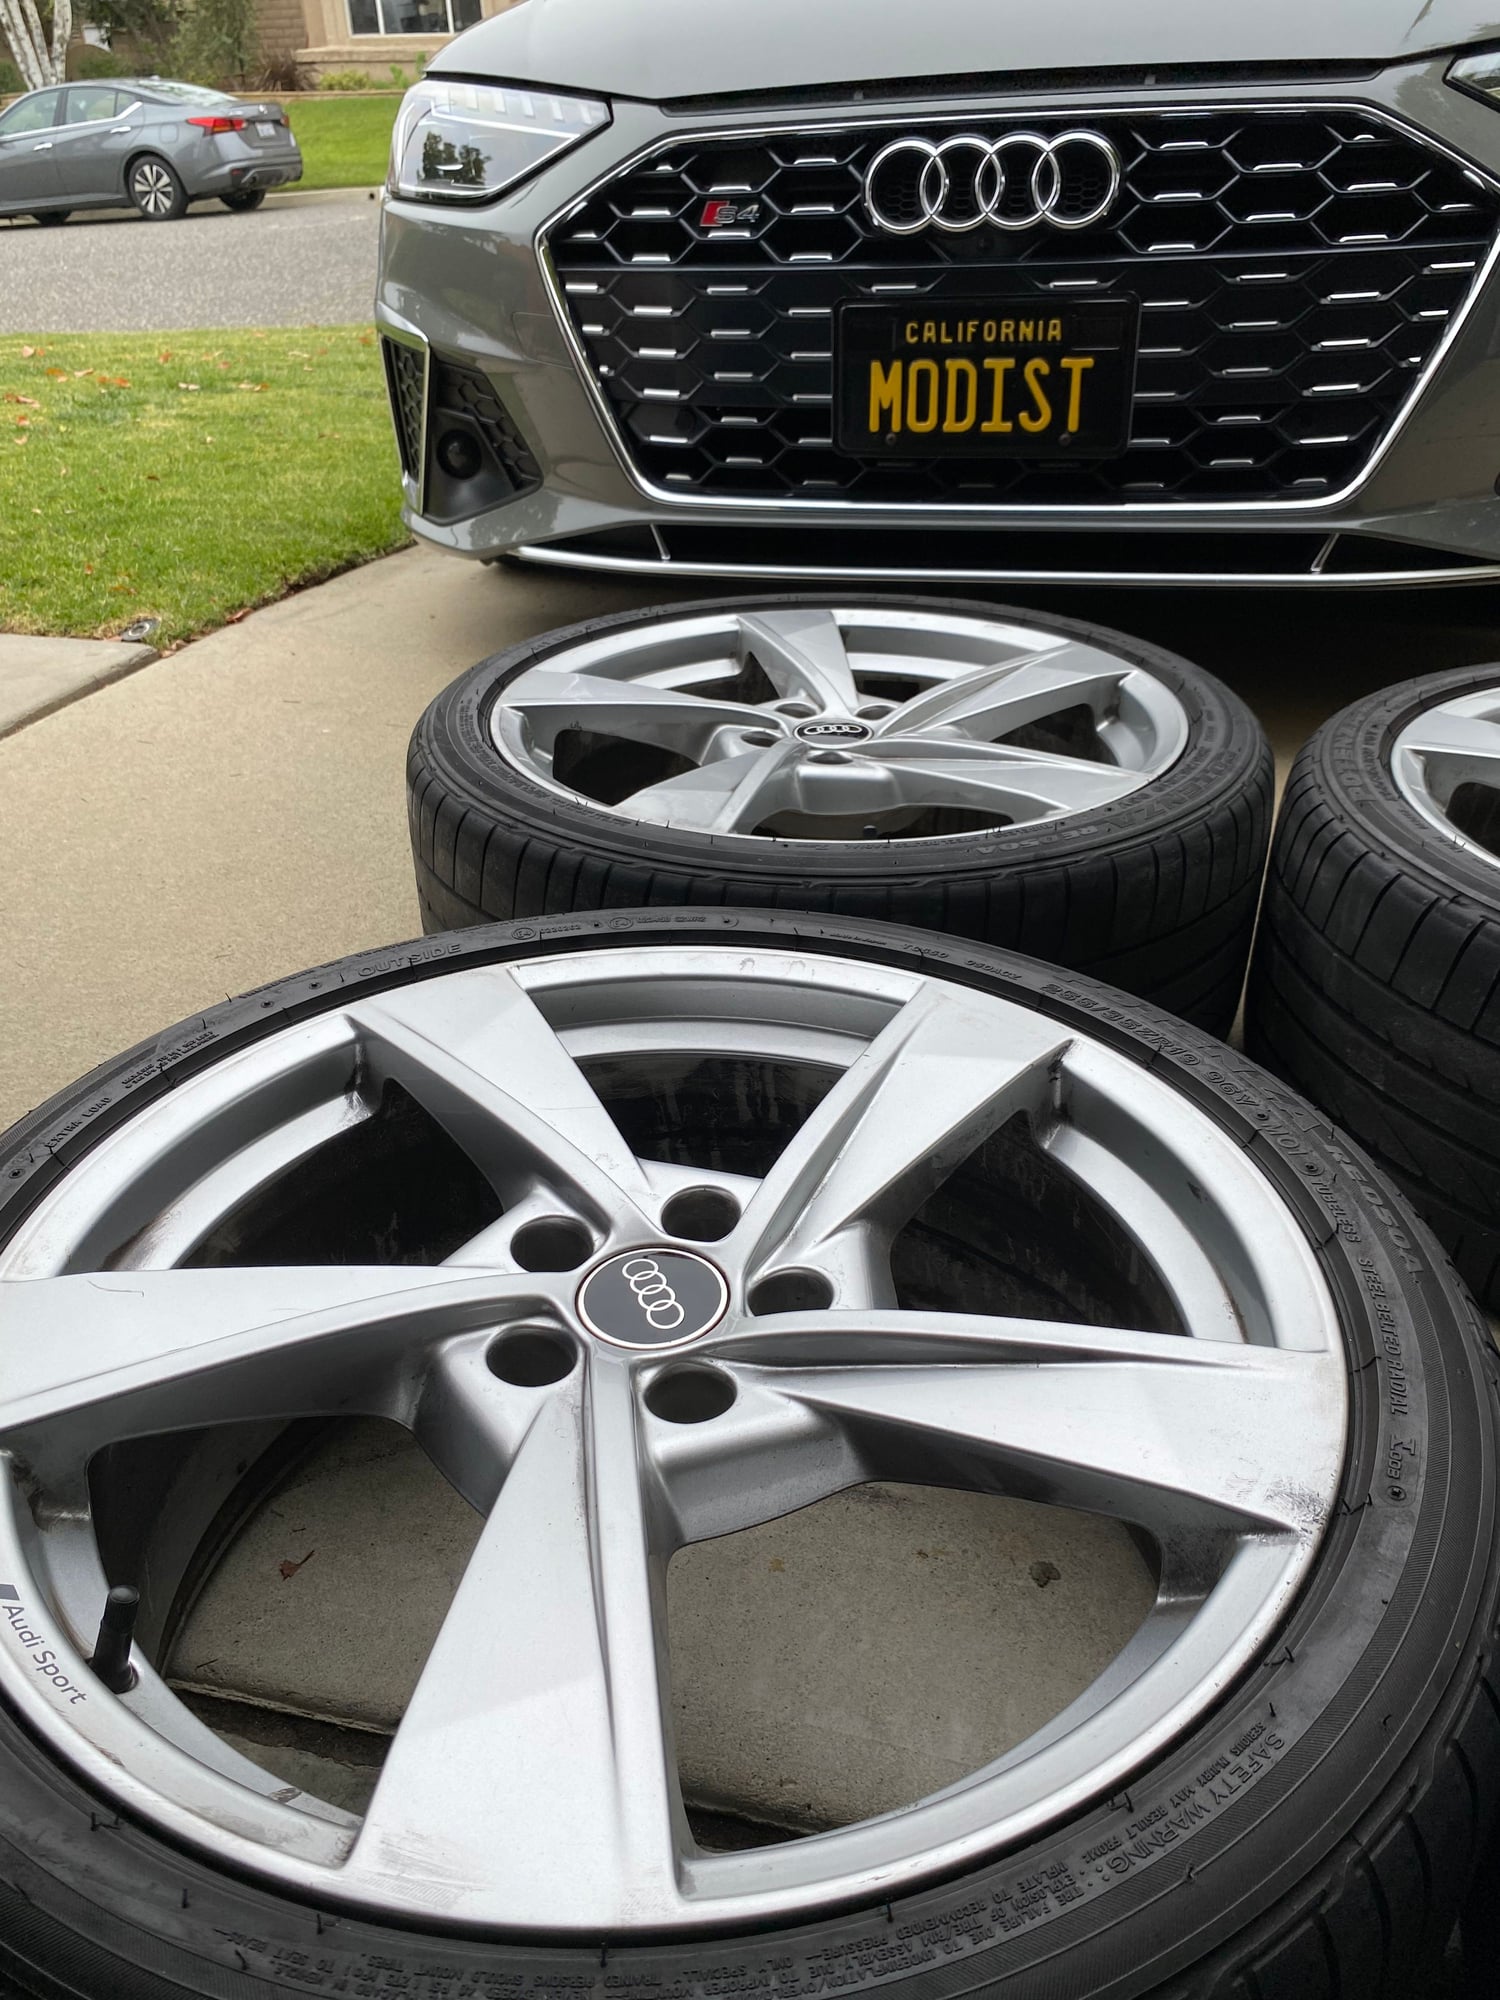 Wheels and Tires/Axles - OEM Audi S4 19" Rotor Wheels - Used - 2022 Audi S4 - Simi Valley, CA 93065, United States